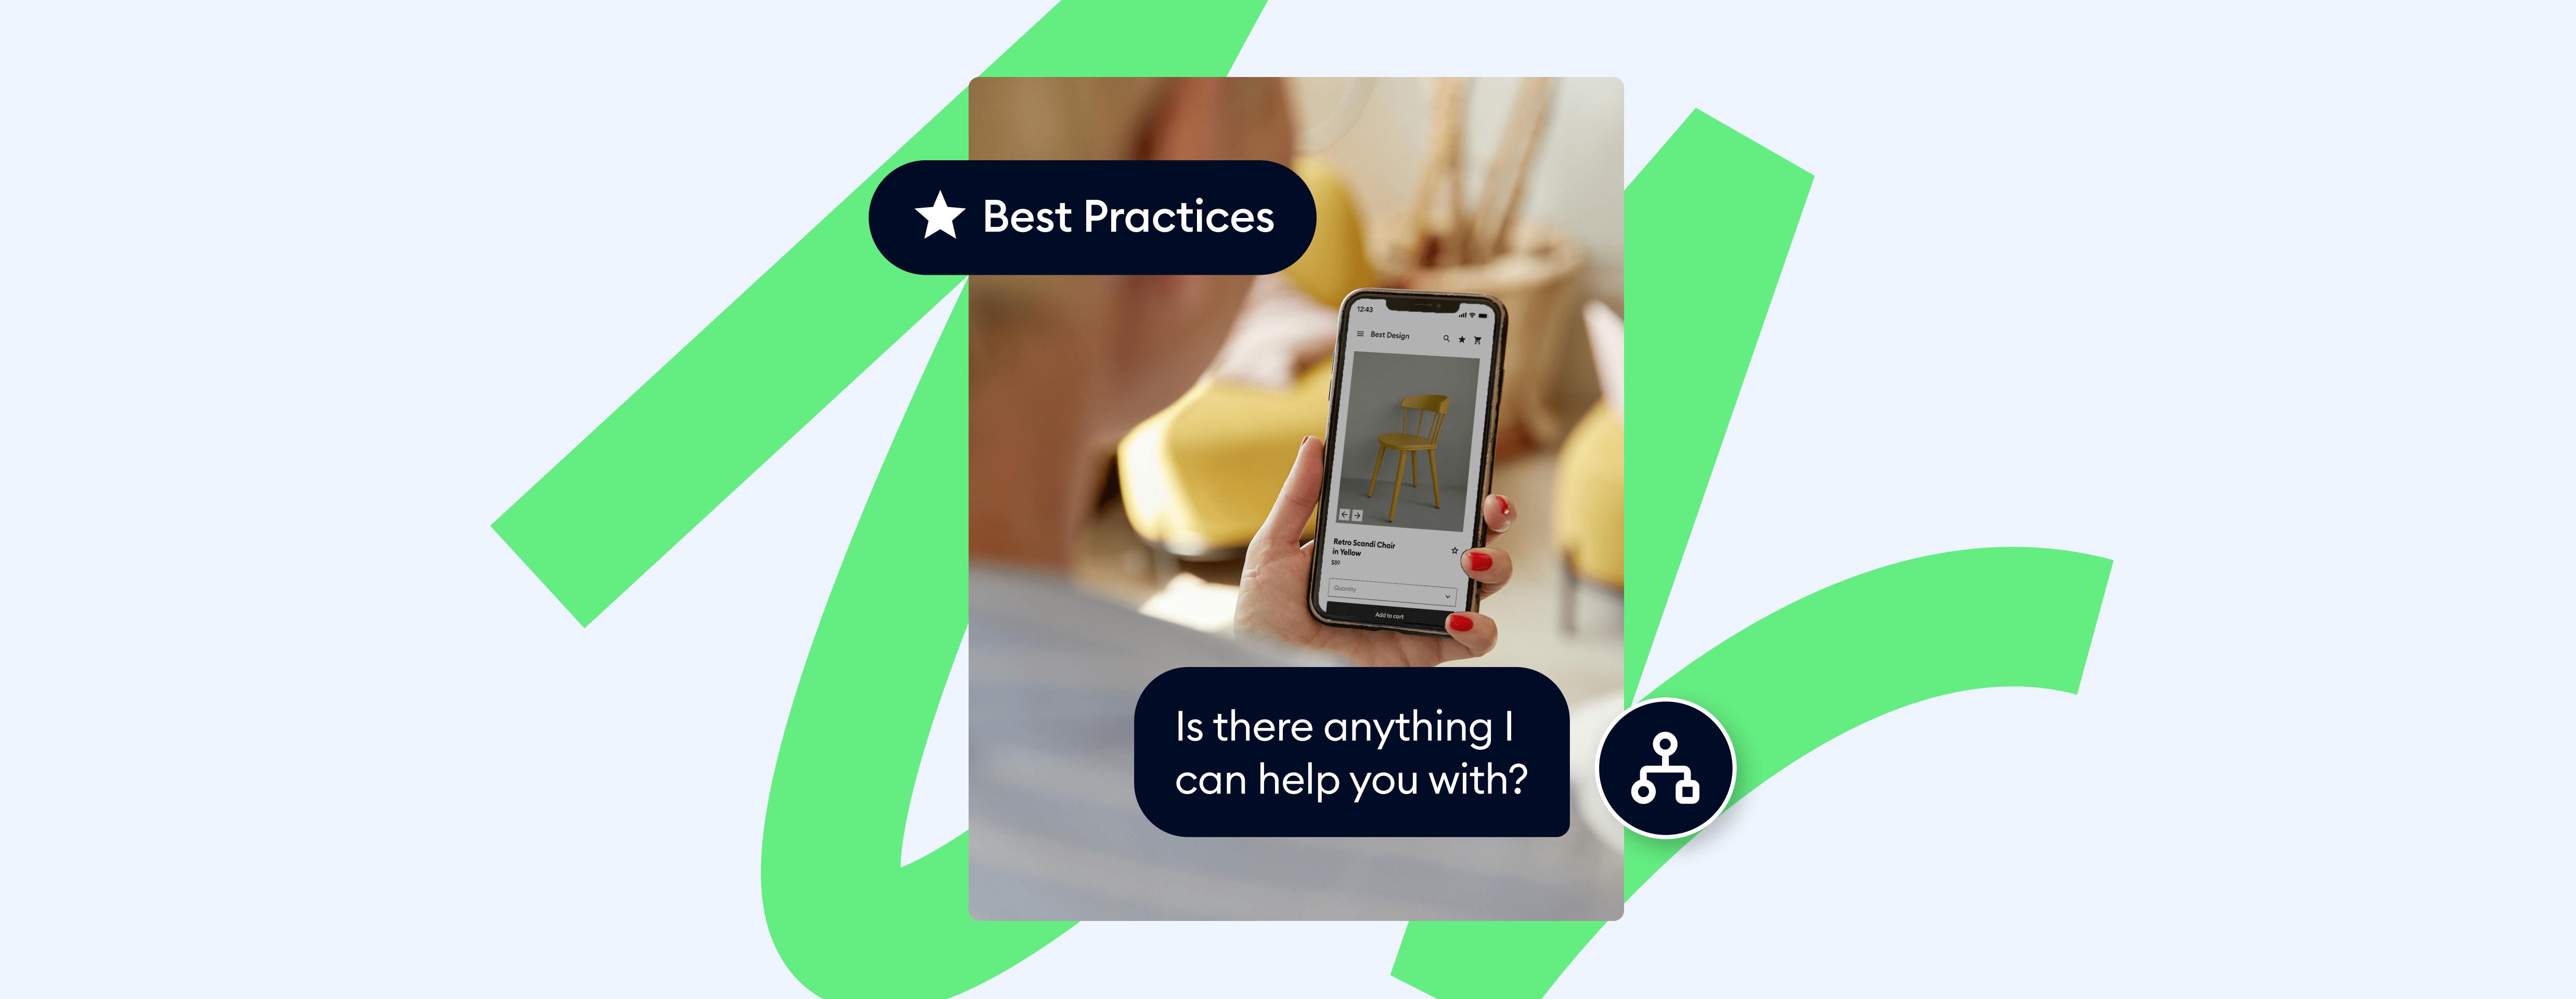 chatbot best practices cover image